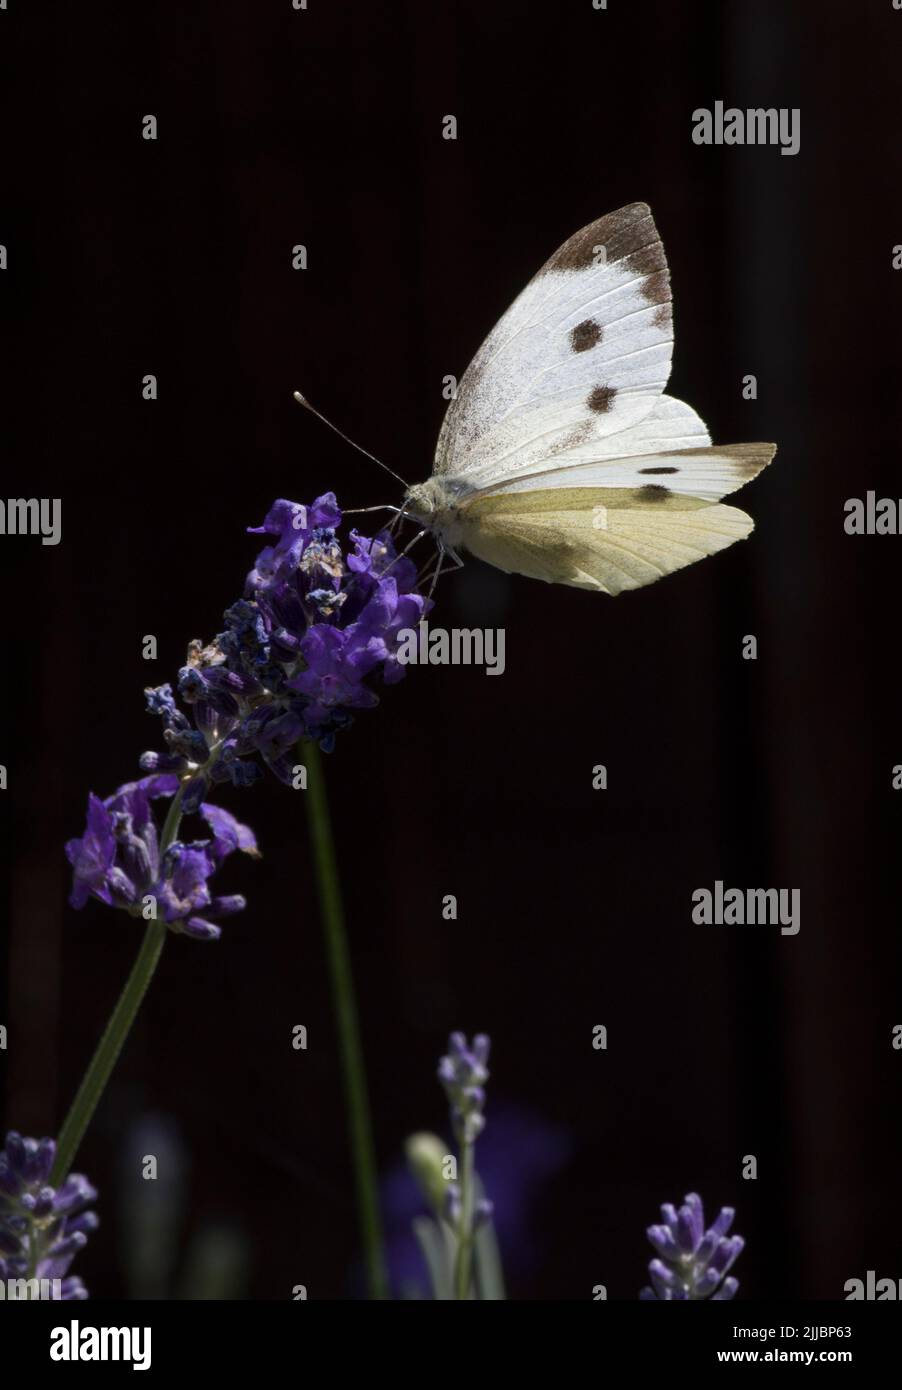 Female Large Cabbage White Butterfly Pieris brassicae on Lavender Stock Photo